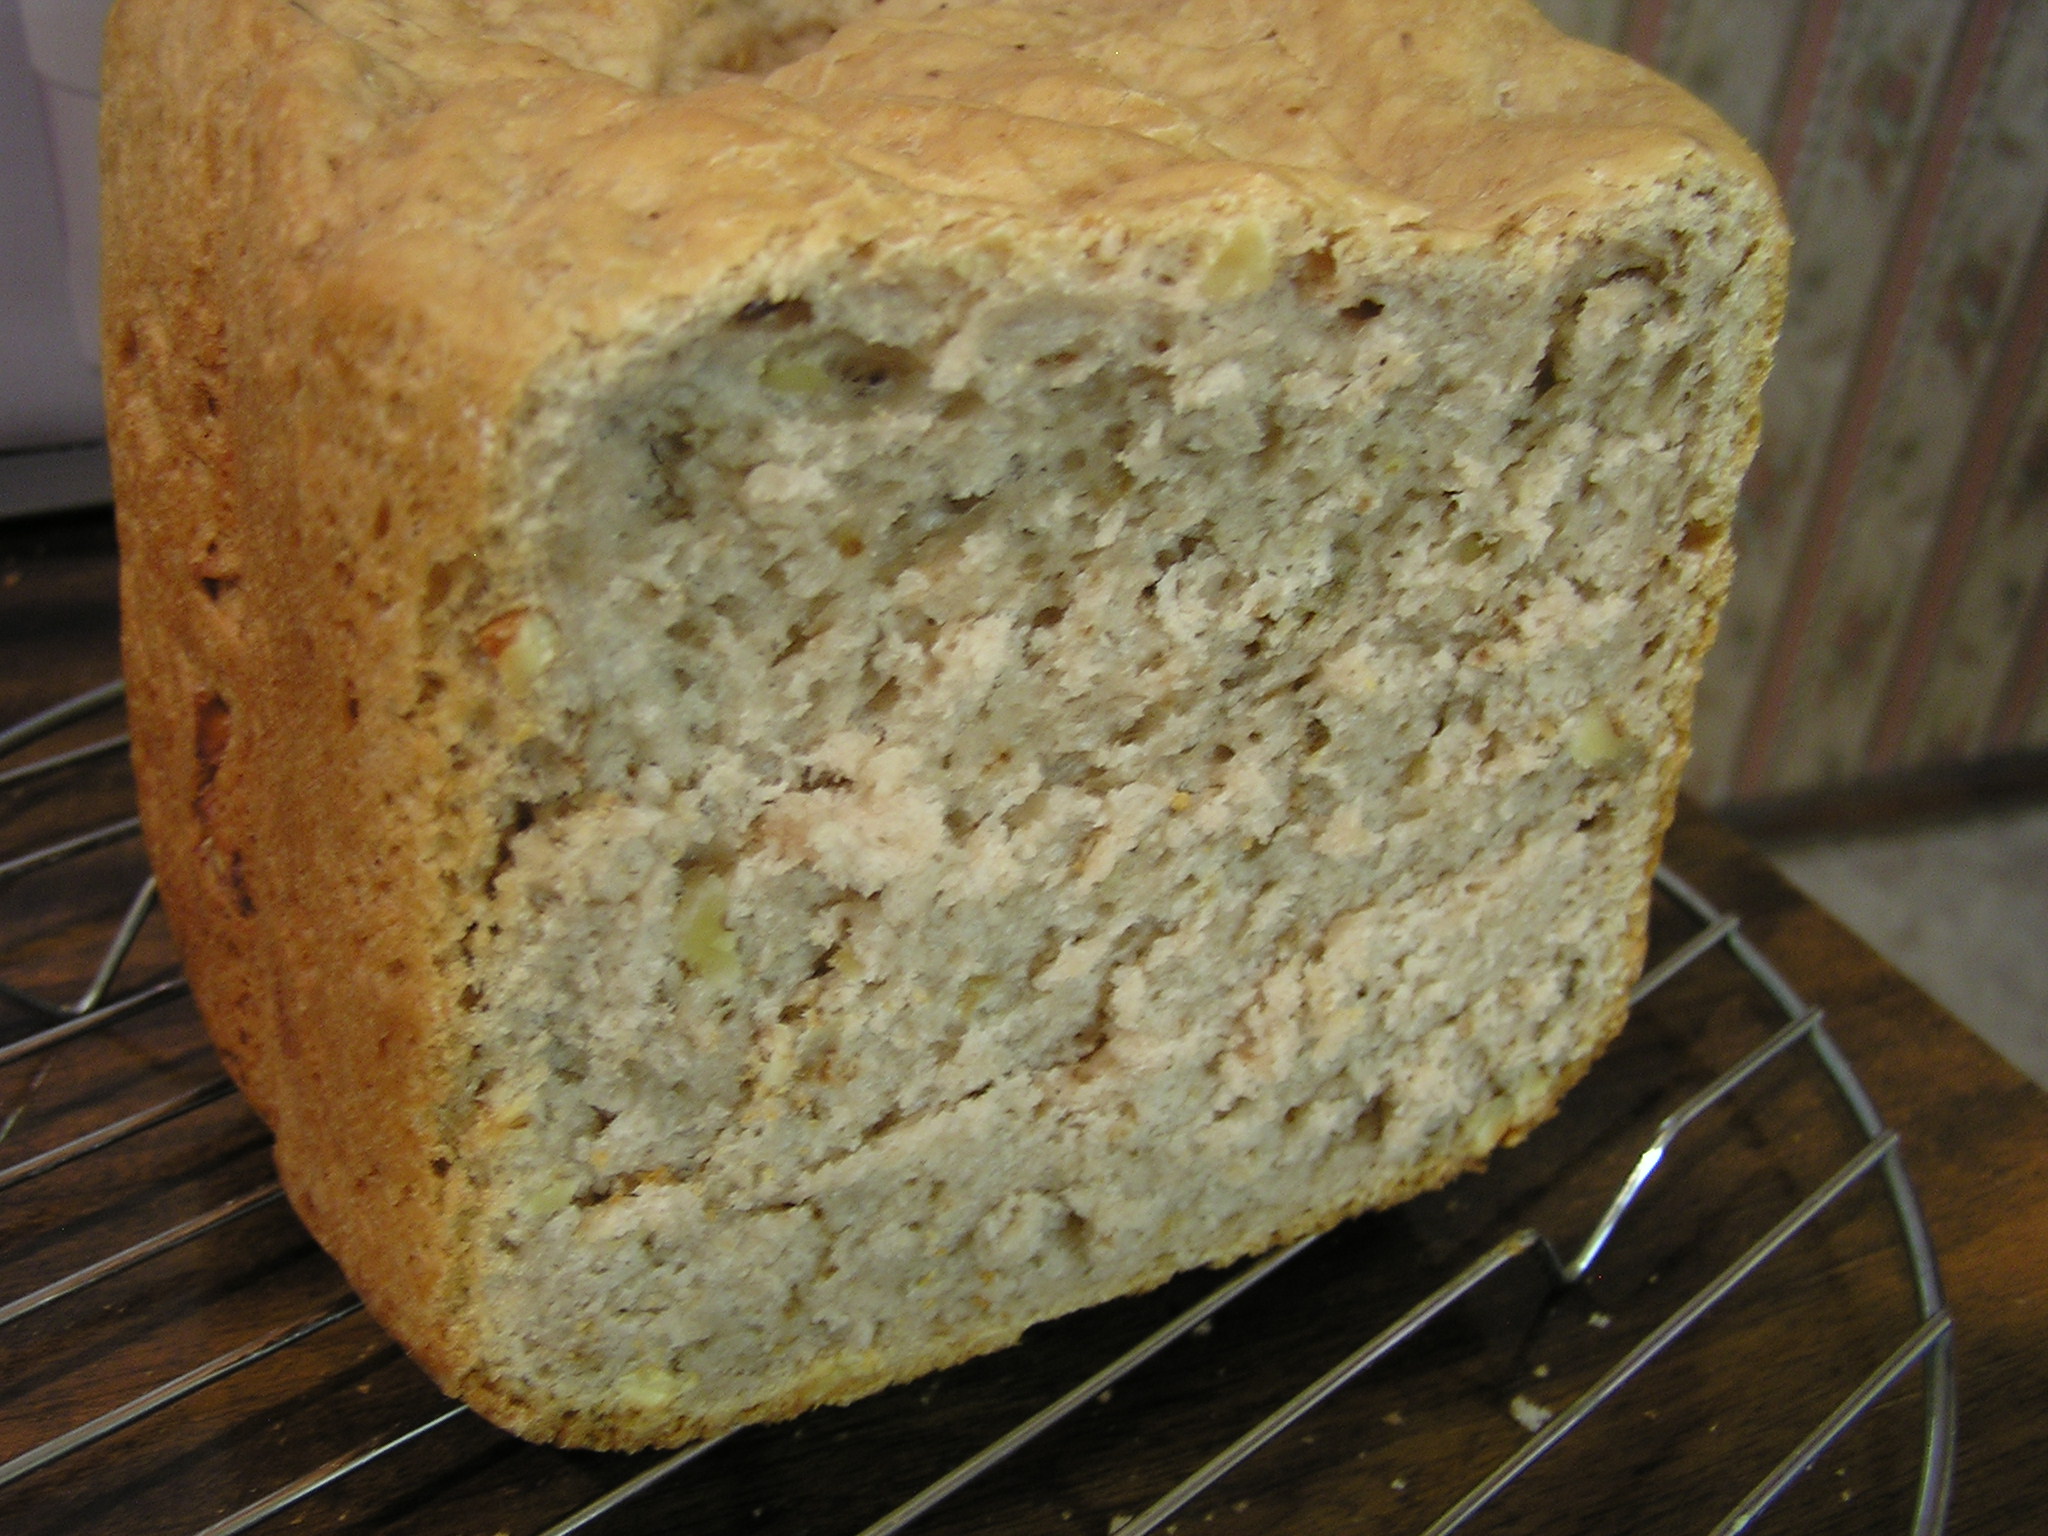 Wheat buckwheat bread with walnuts (Posted by Caprice)